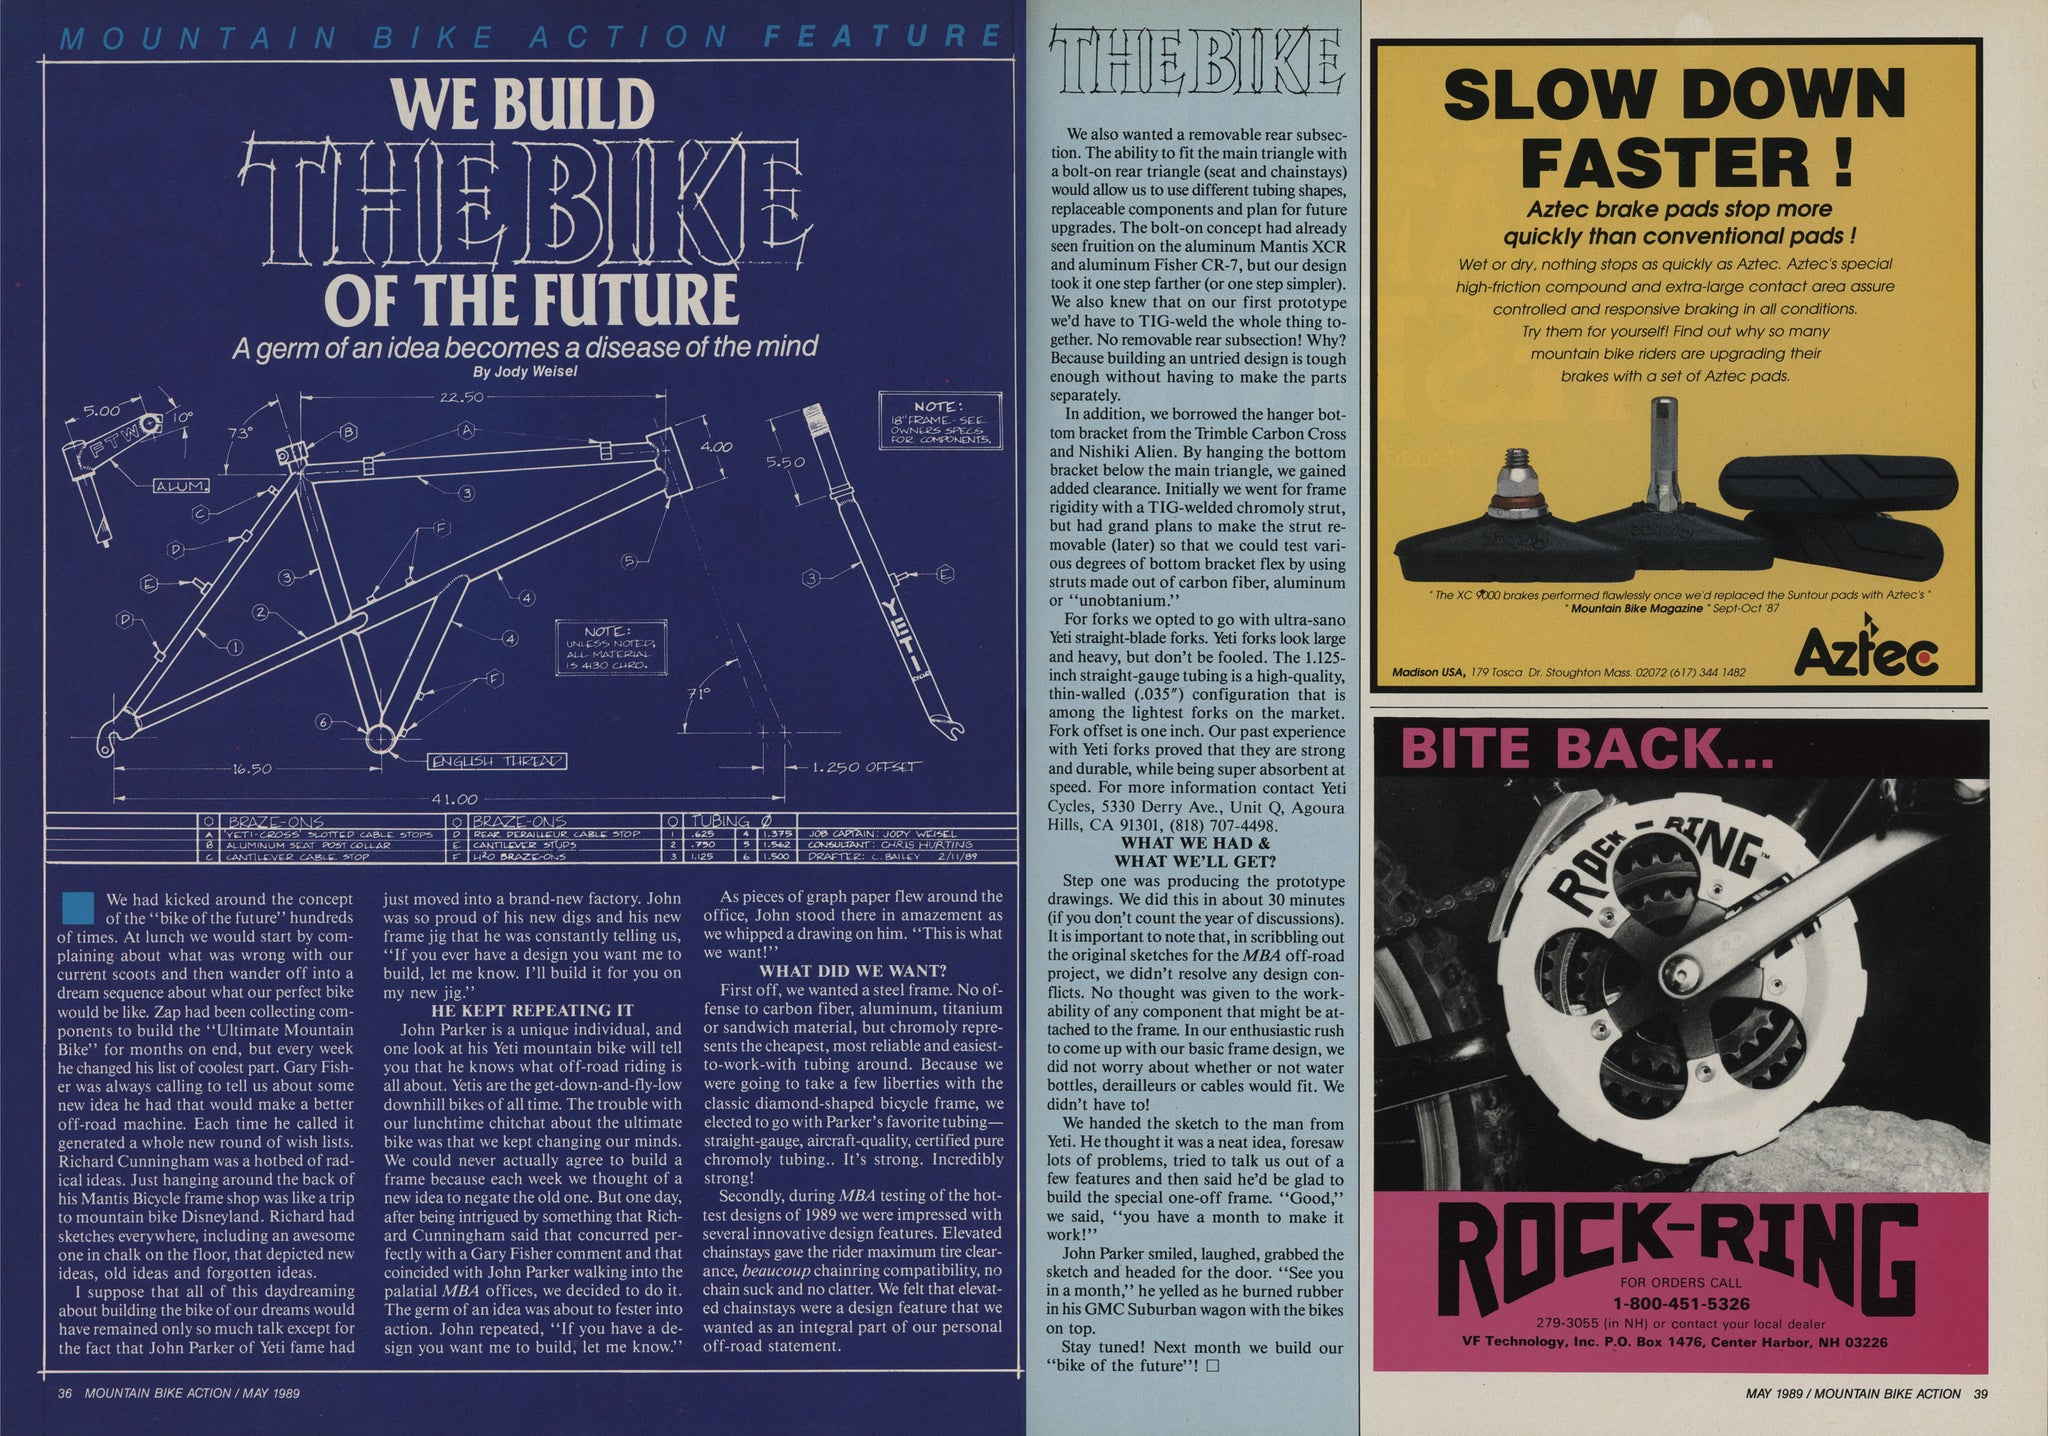 We build the bike of the future article